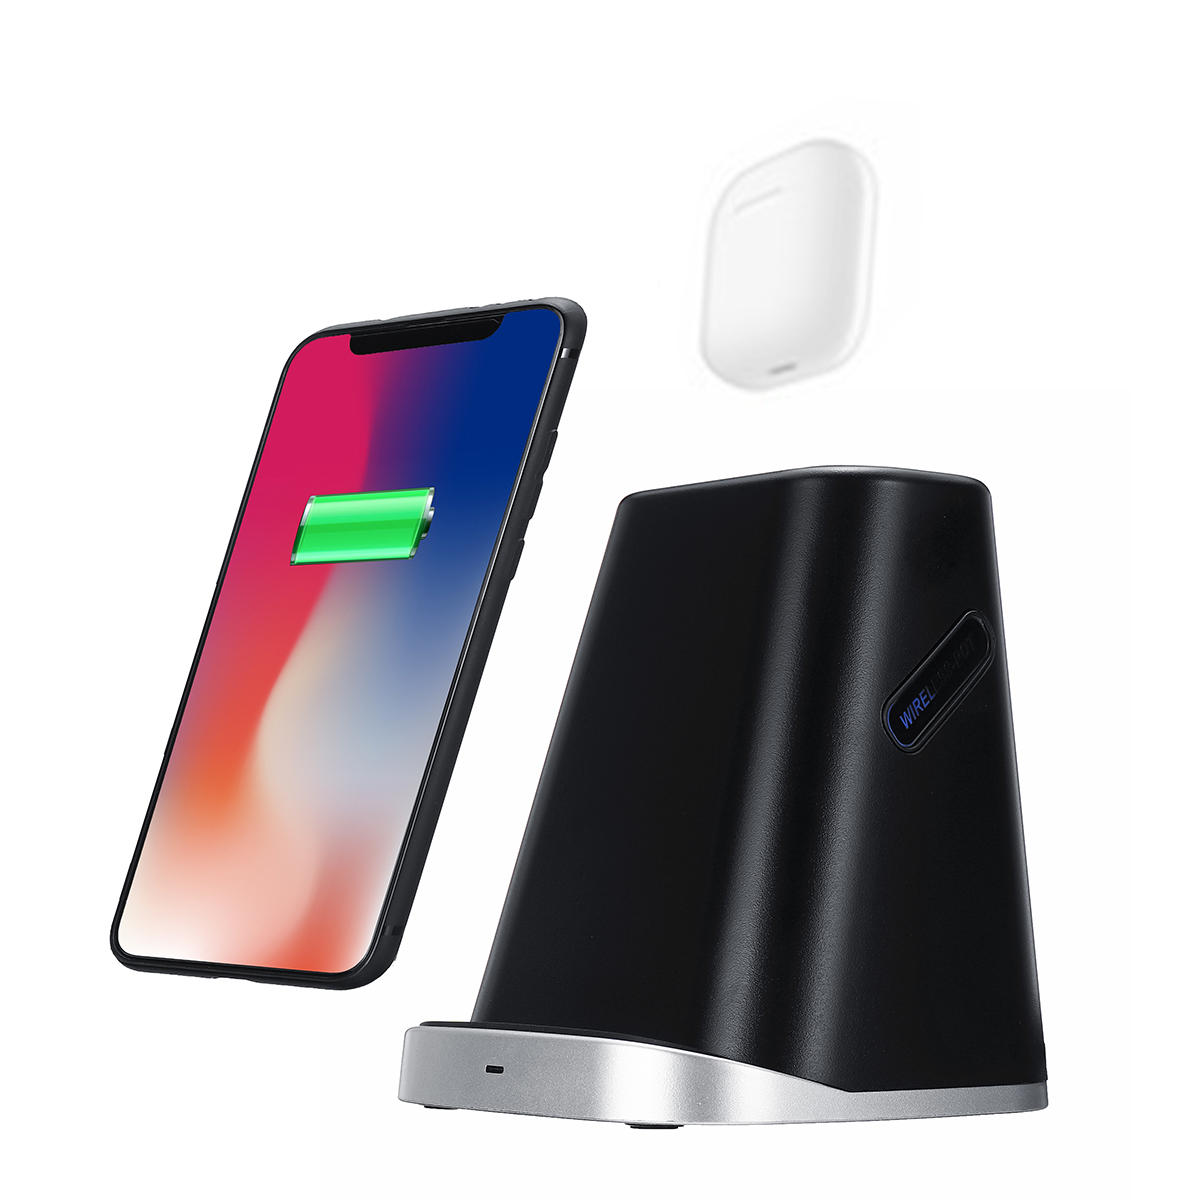 

Bakeey 2 in 1 9V Qi Fast Wireless Charger Dock Pad Stand Holder for iPhone 11 X XS XR Airpods